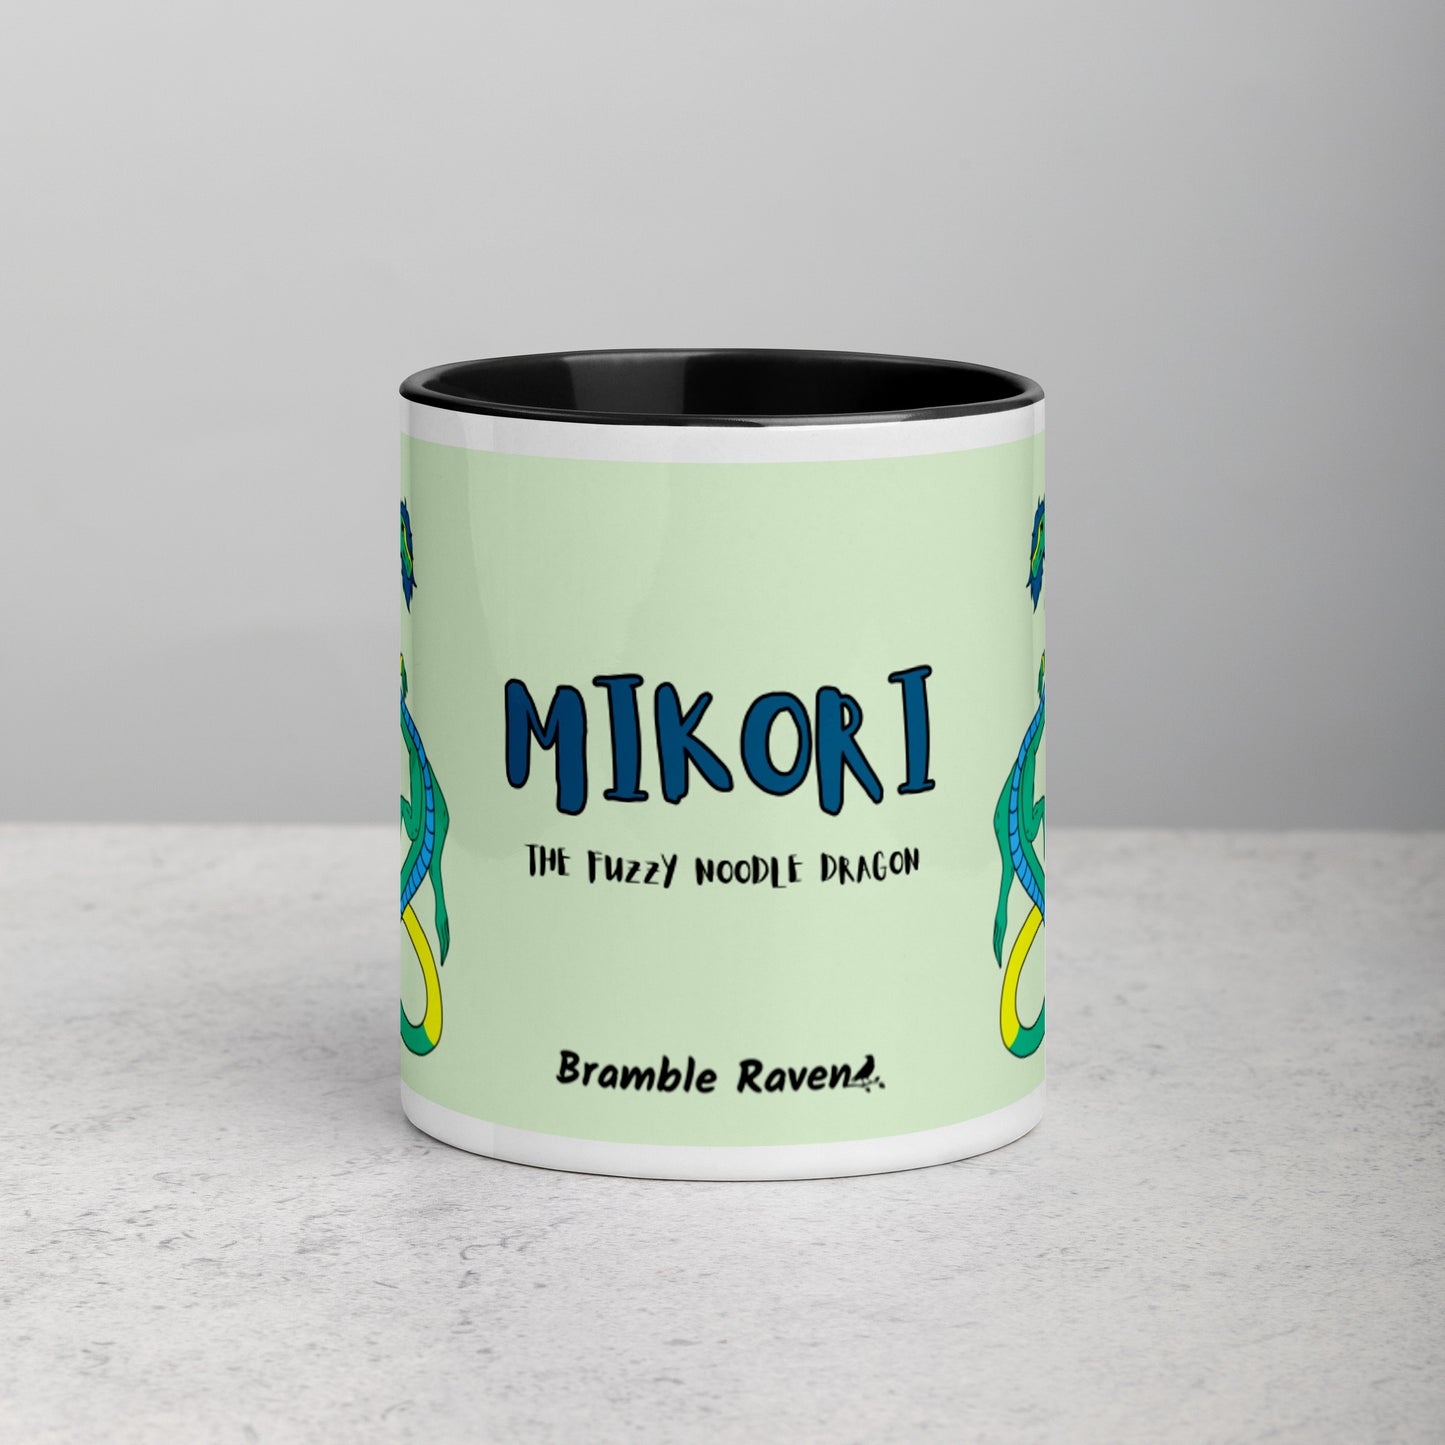 11 ounce white ceramic mug. Black inside and handle. Features double-sided image of Mikori the Fuzzy Noodle Dragon. Shown on tabletop. Front view shows Mikori the Fuzzy Noodle Dragon text and Bramble Raven logo.